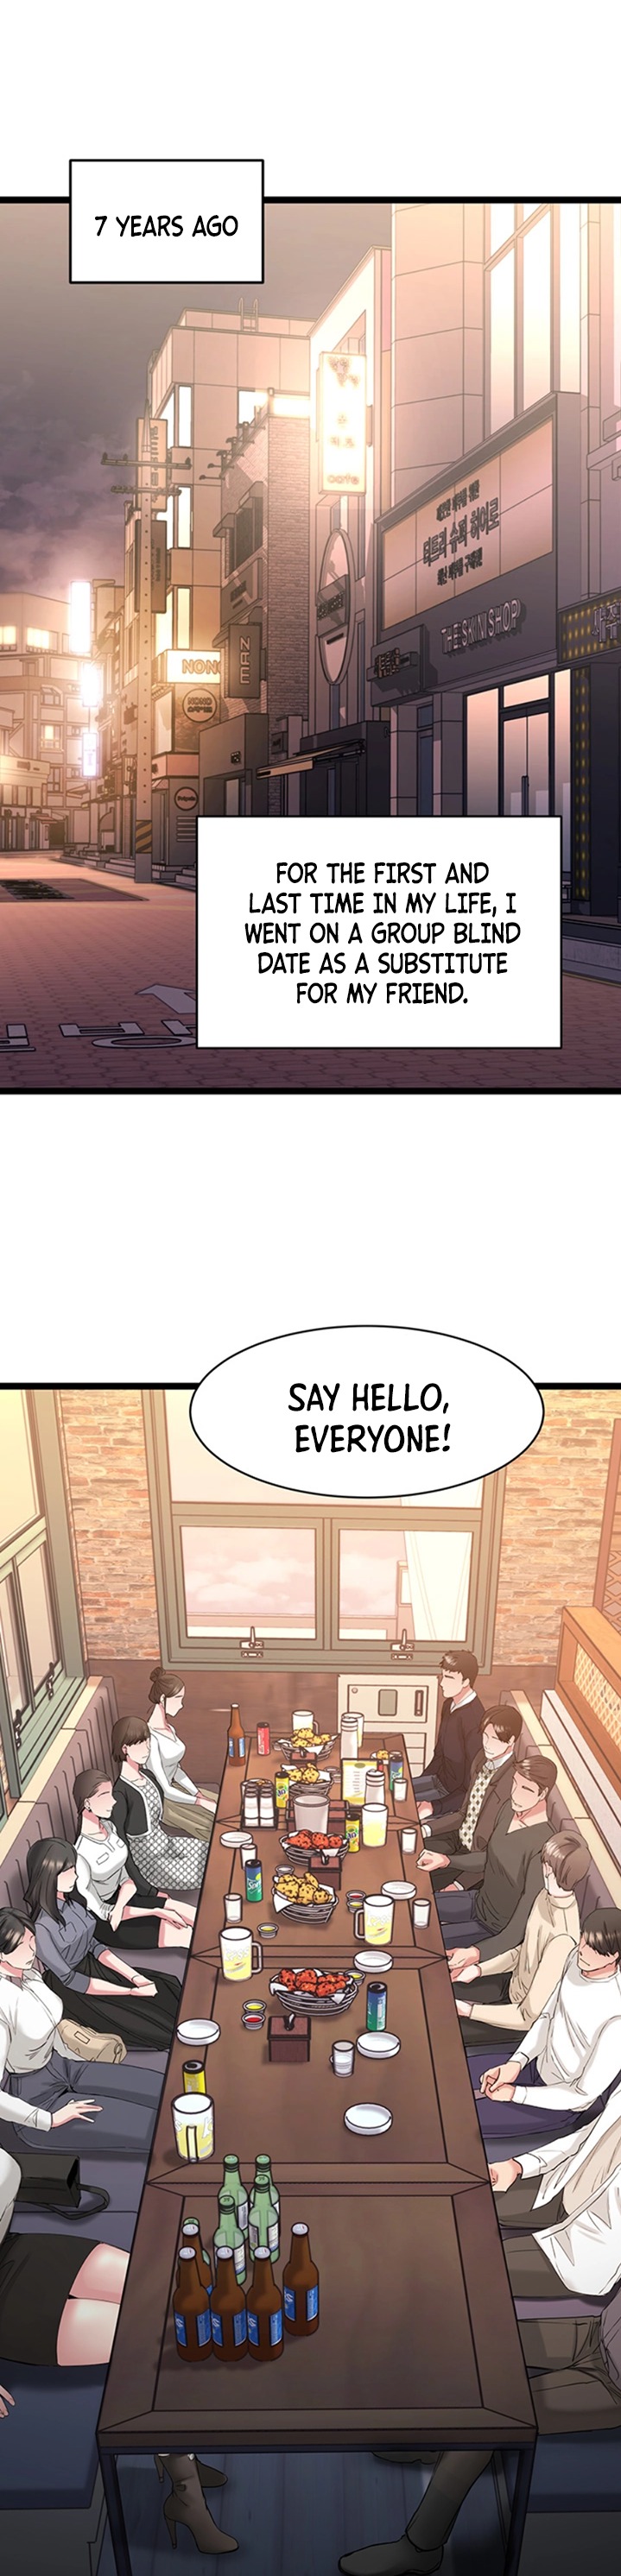 My Female Friend Who Crossed The Line - Chapter 1 Page 1